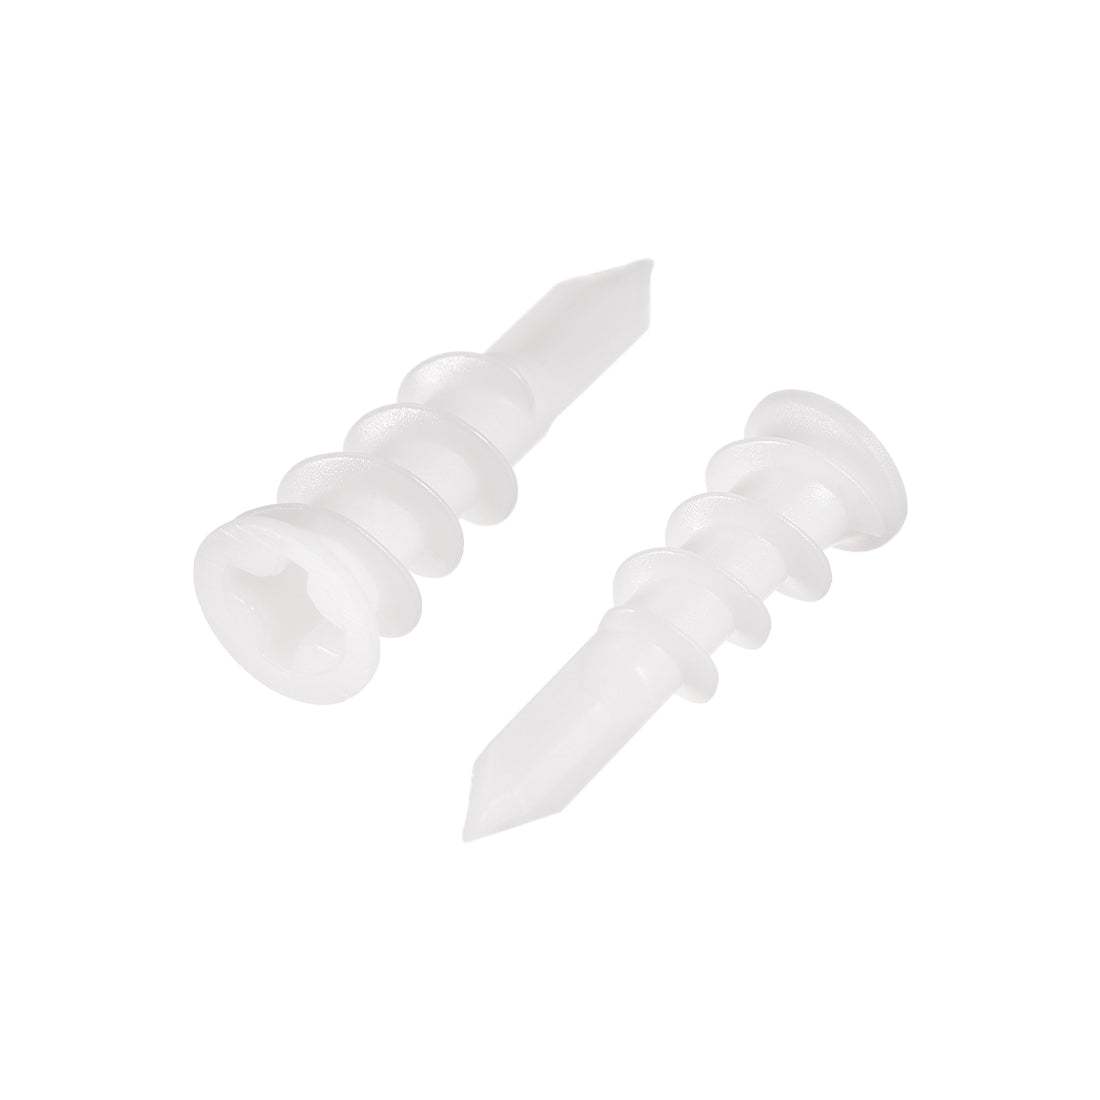 uxcell Uxcell 10x32mm Plastic Expansion Tube Drywall Wall Fixing White 25pcs